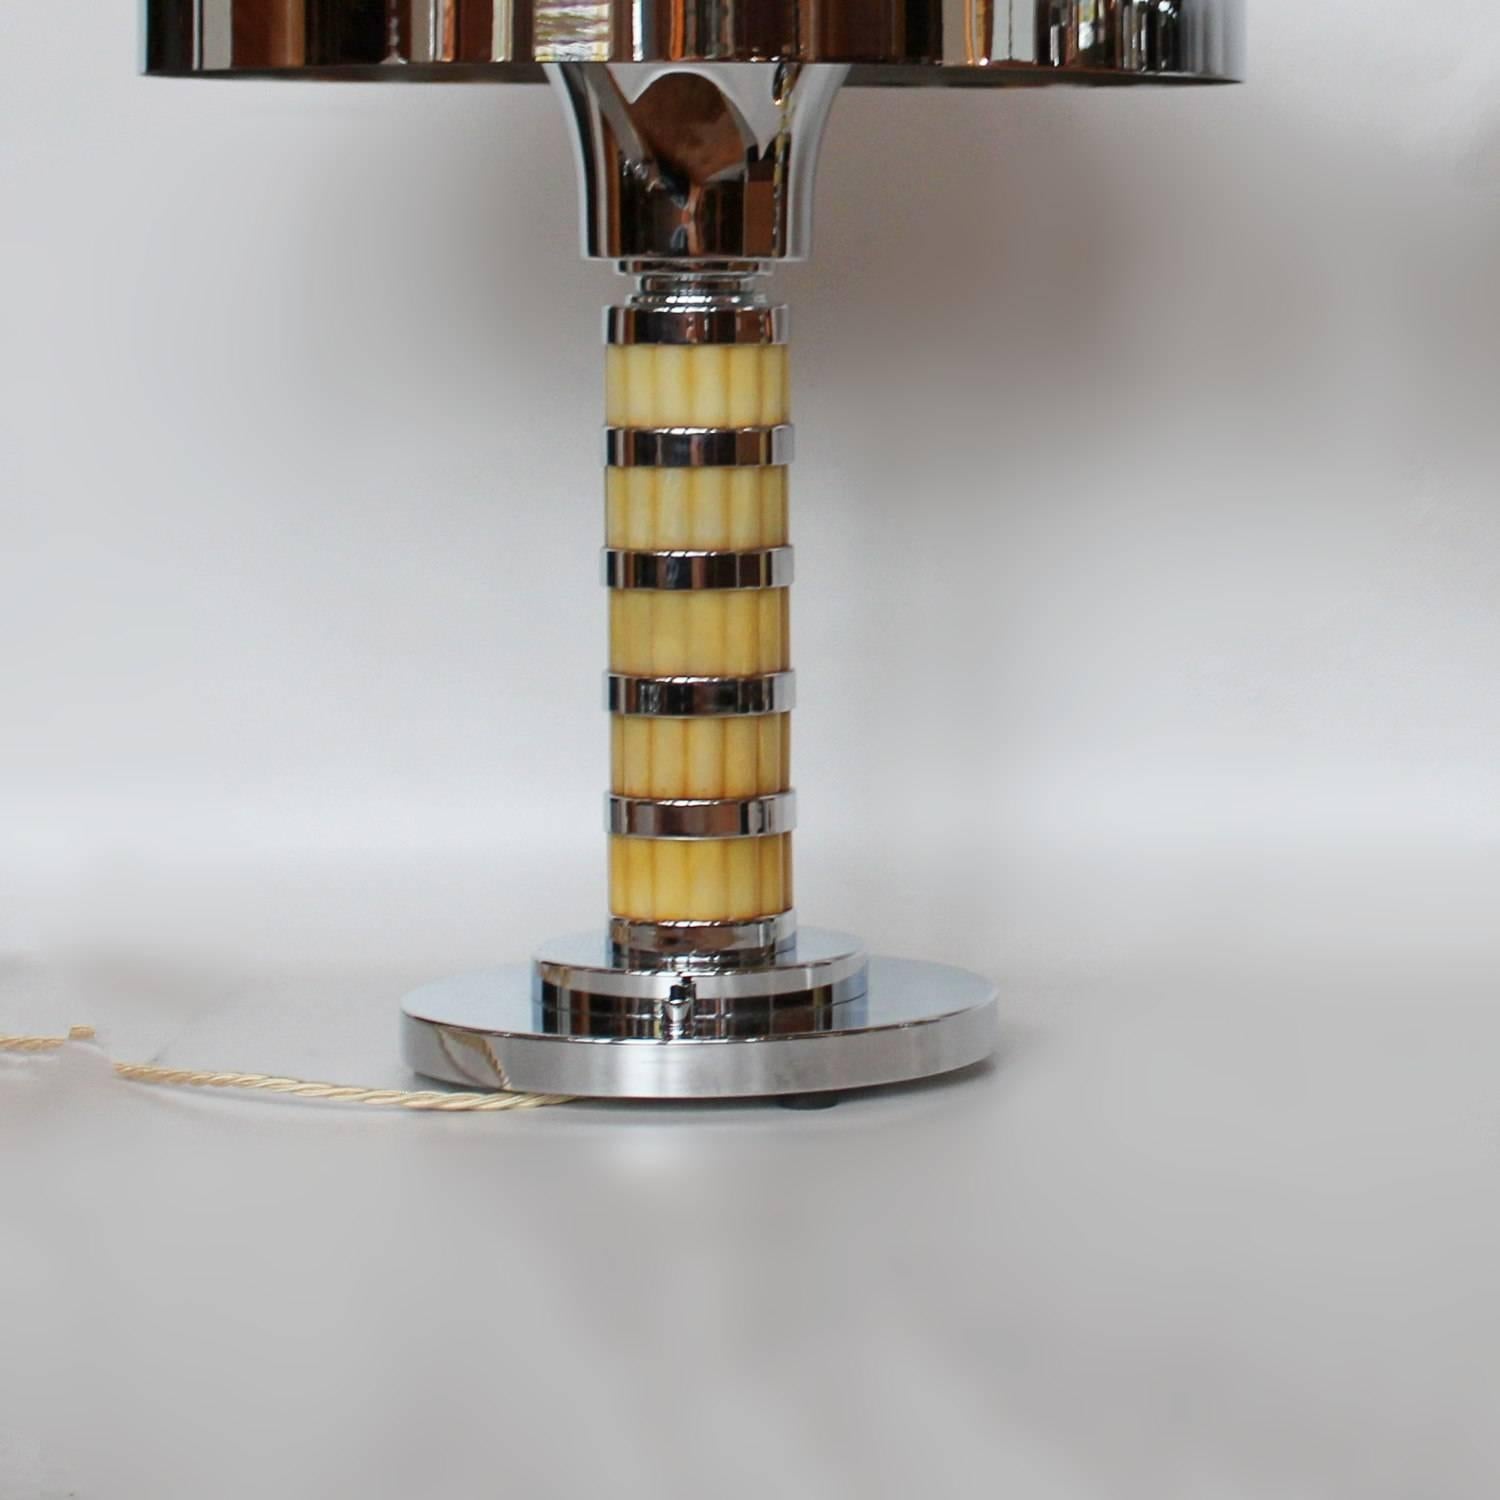 A pair of Art Deco table lamps with domed shades. Five sectioned reeded pale yellow bakelite stem with chrome metal banding. Chromed metal base. Yellow bakelite finial to top

Fully refurbished, re-chromed and re-wired

Dimensions: H 50 cm, W of